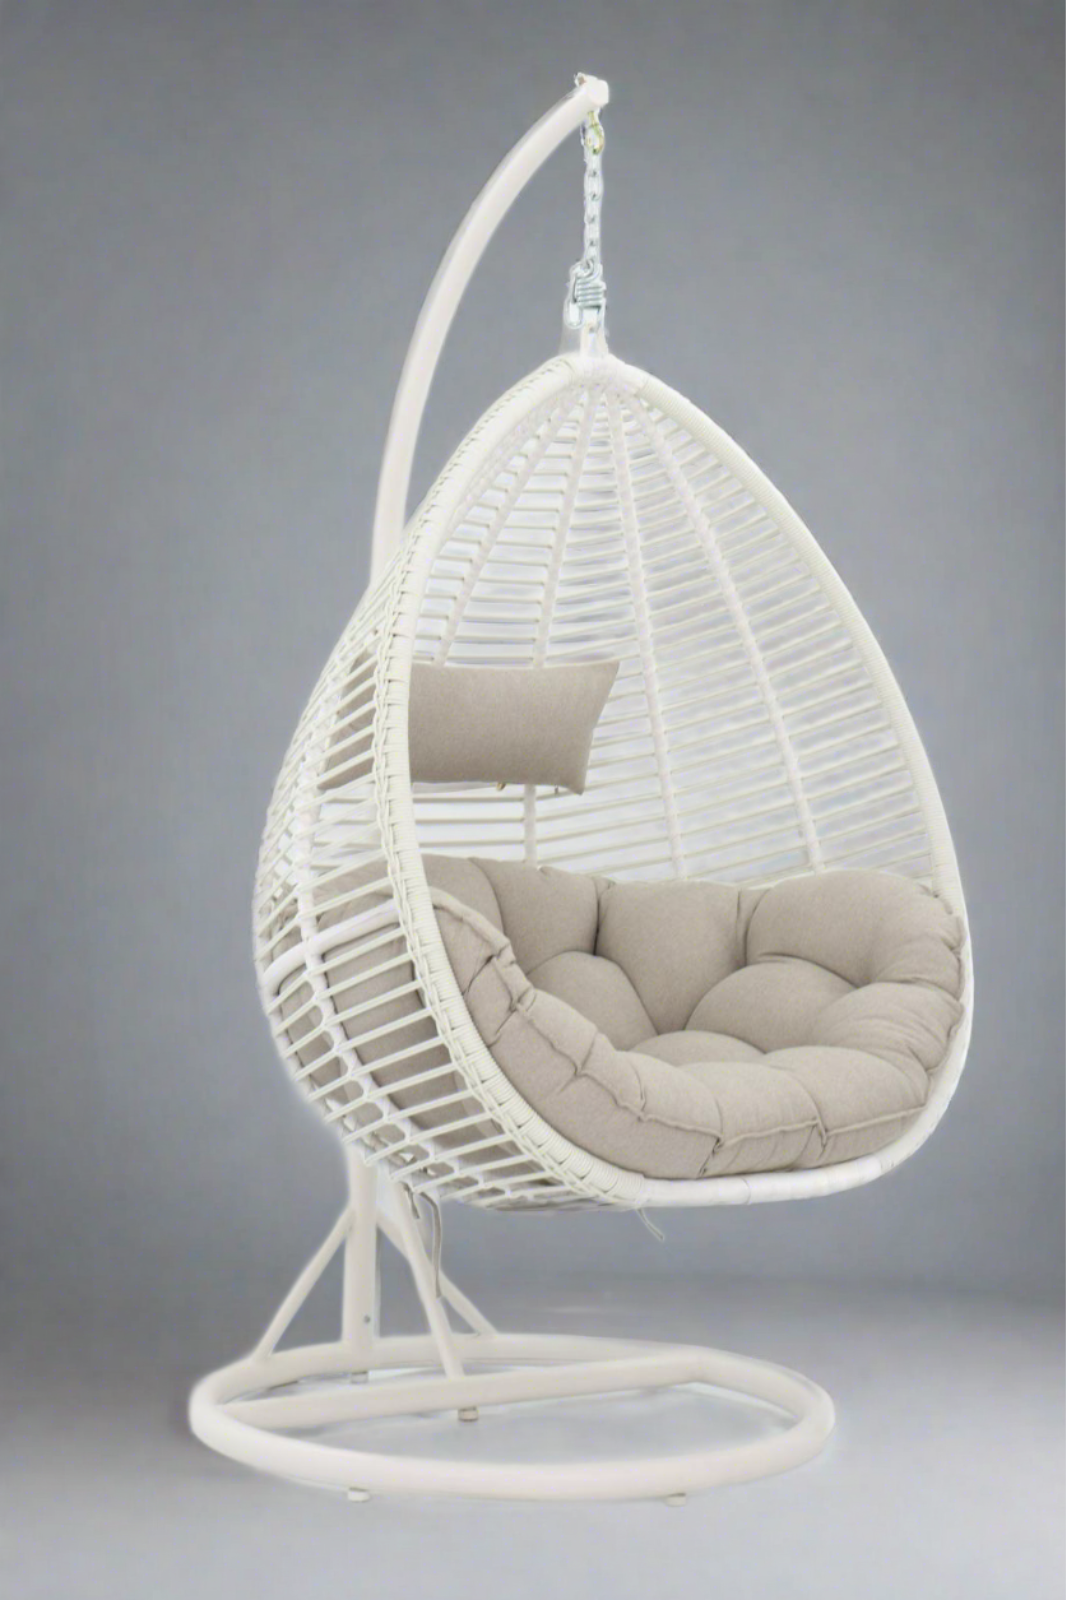 ARI Outdoor Hanging Egg Chair White - Outdoor Patio Hanging Egg Chair with Cushion and Metal Stand. Frame: steel, powder coated. Round Wicker woven